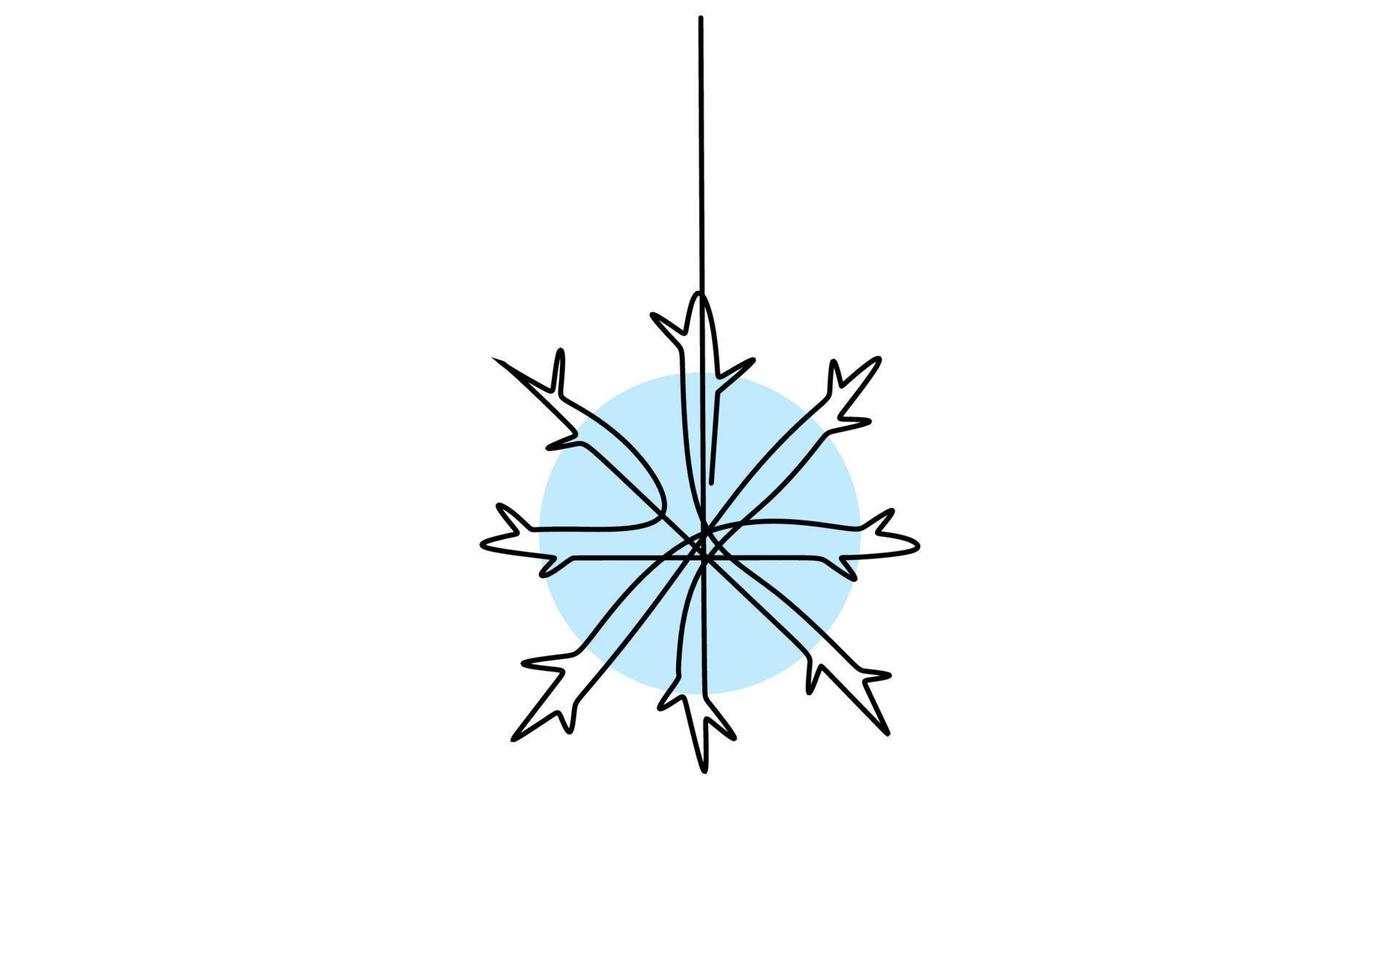 Hand drawing one single continuous line of snowflake vector